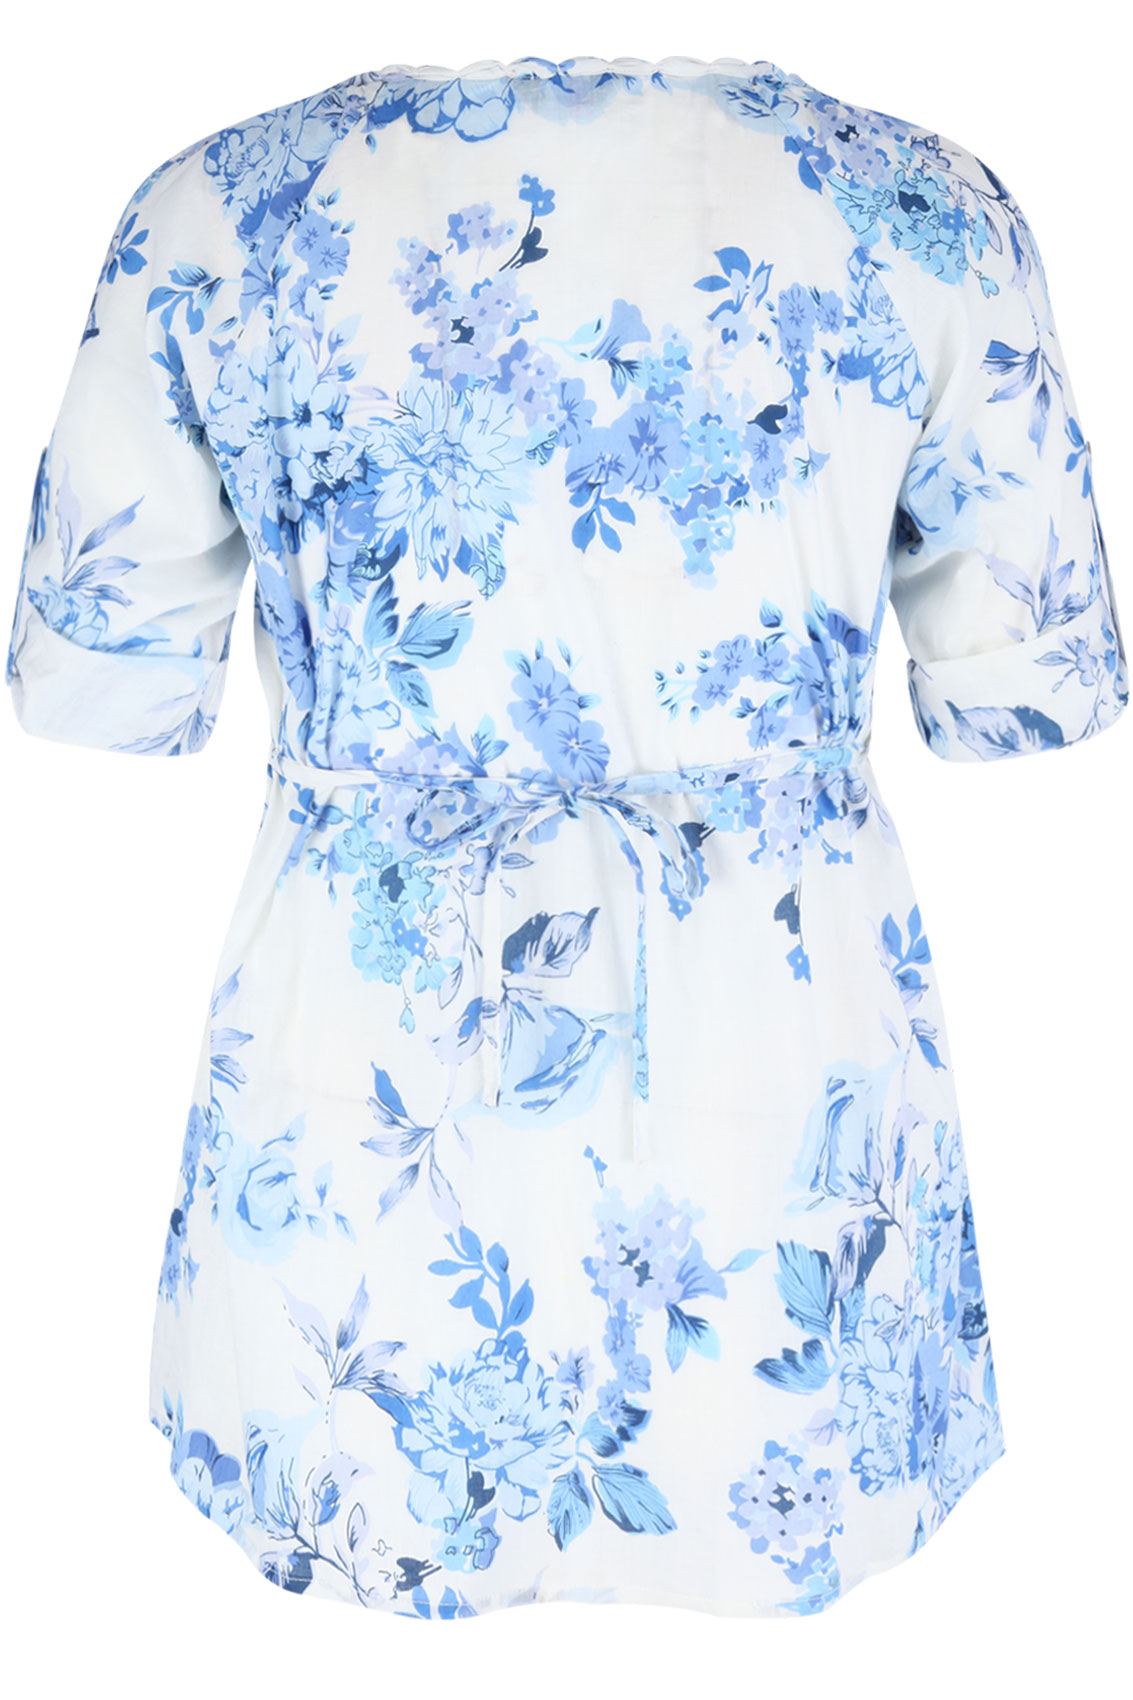 White and Blue Longline Floral Blouse With 3/4 Sleeves